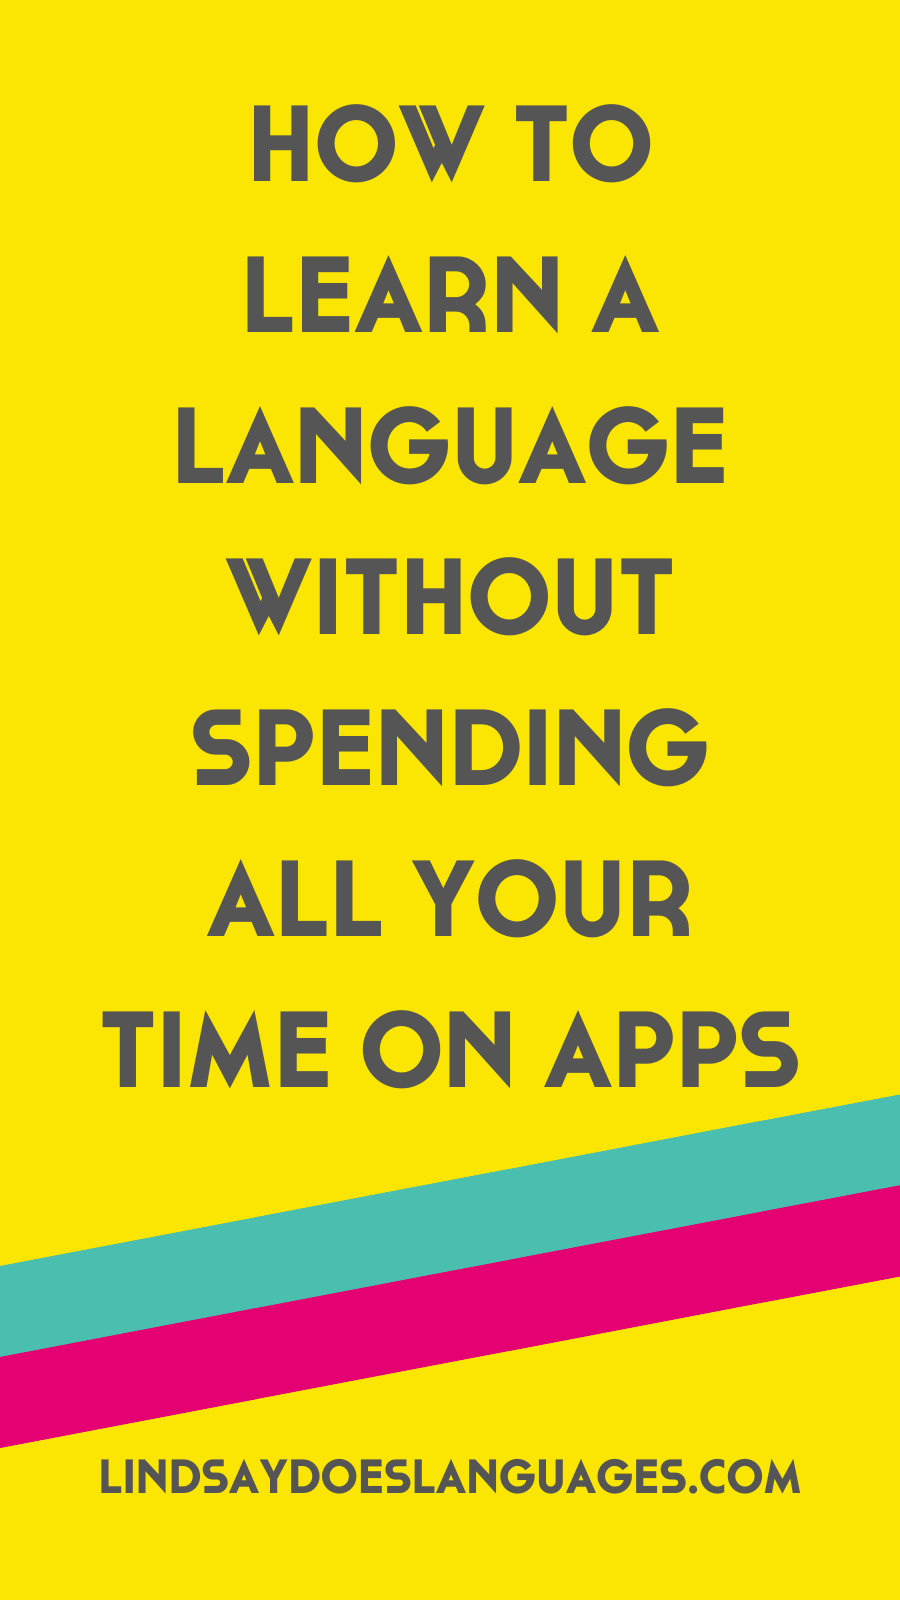 Language apps are great but sometimes, it's easy to do nothing else. Here's how to learn a language without spending all your time on apps.